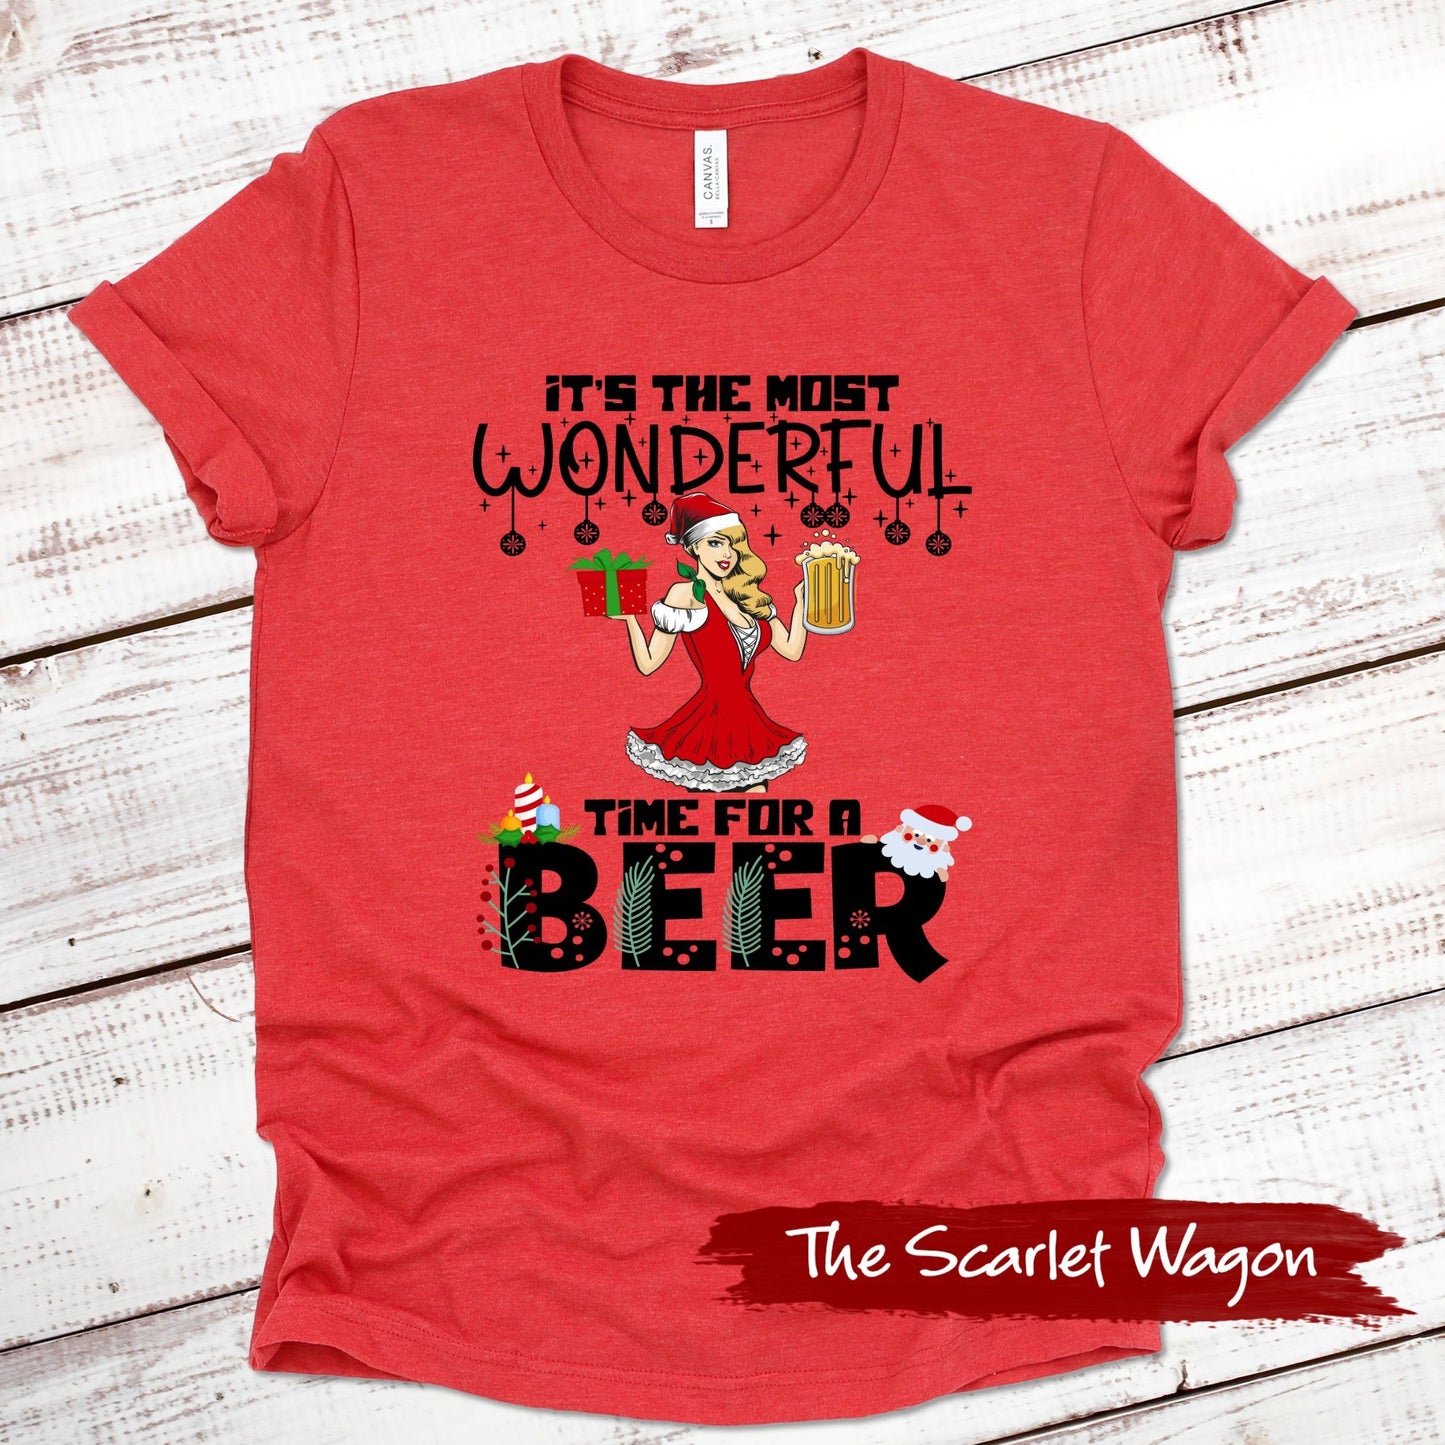 Most Wonderful Time for a Beer Christmas Shirt Scarlet Wagon Heather Red XS 